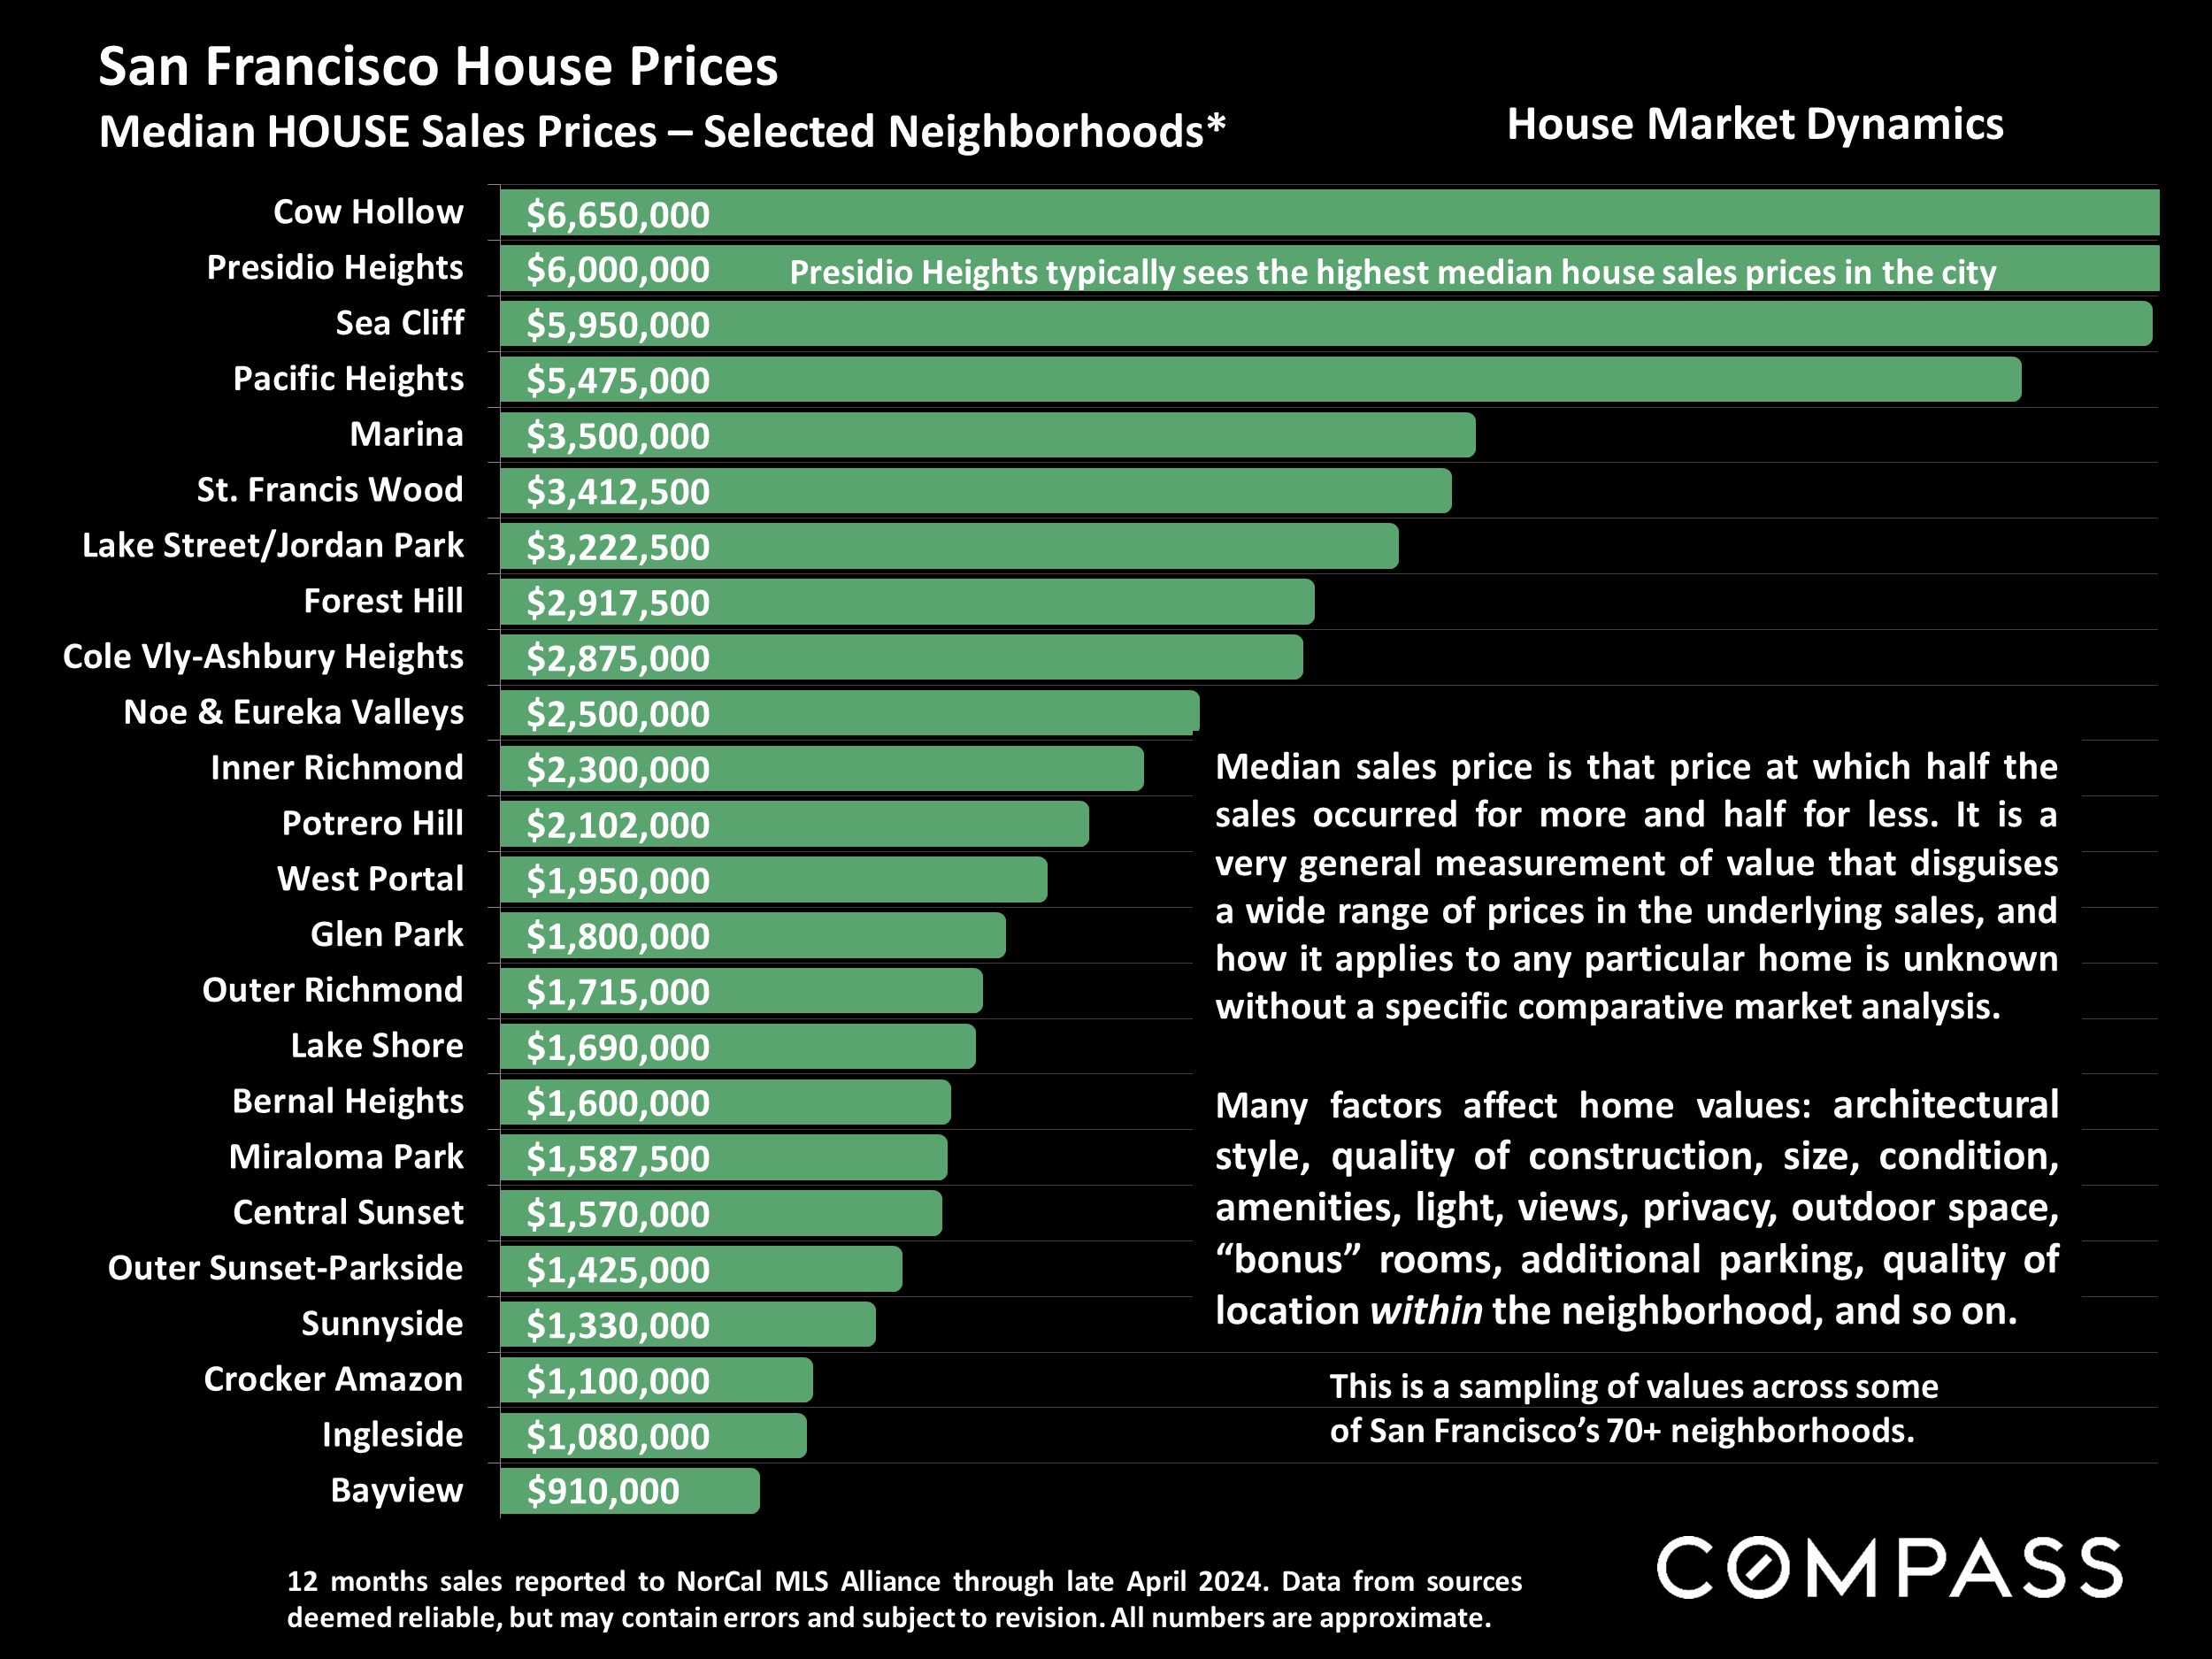 San Francisco House Prices Median HOUSE Sales Prices - Selected Neighborhoods*